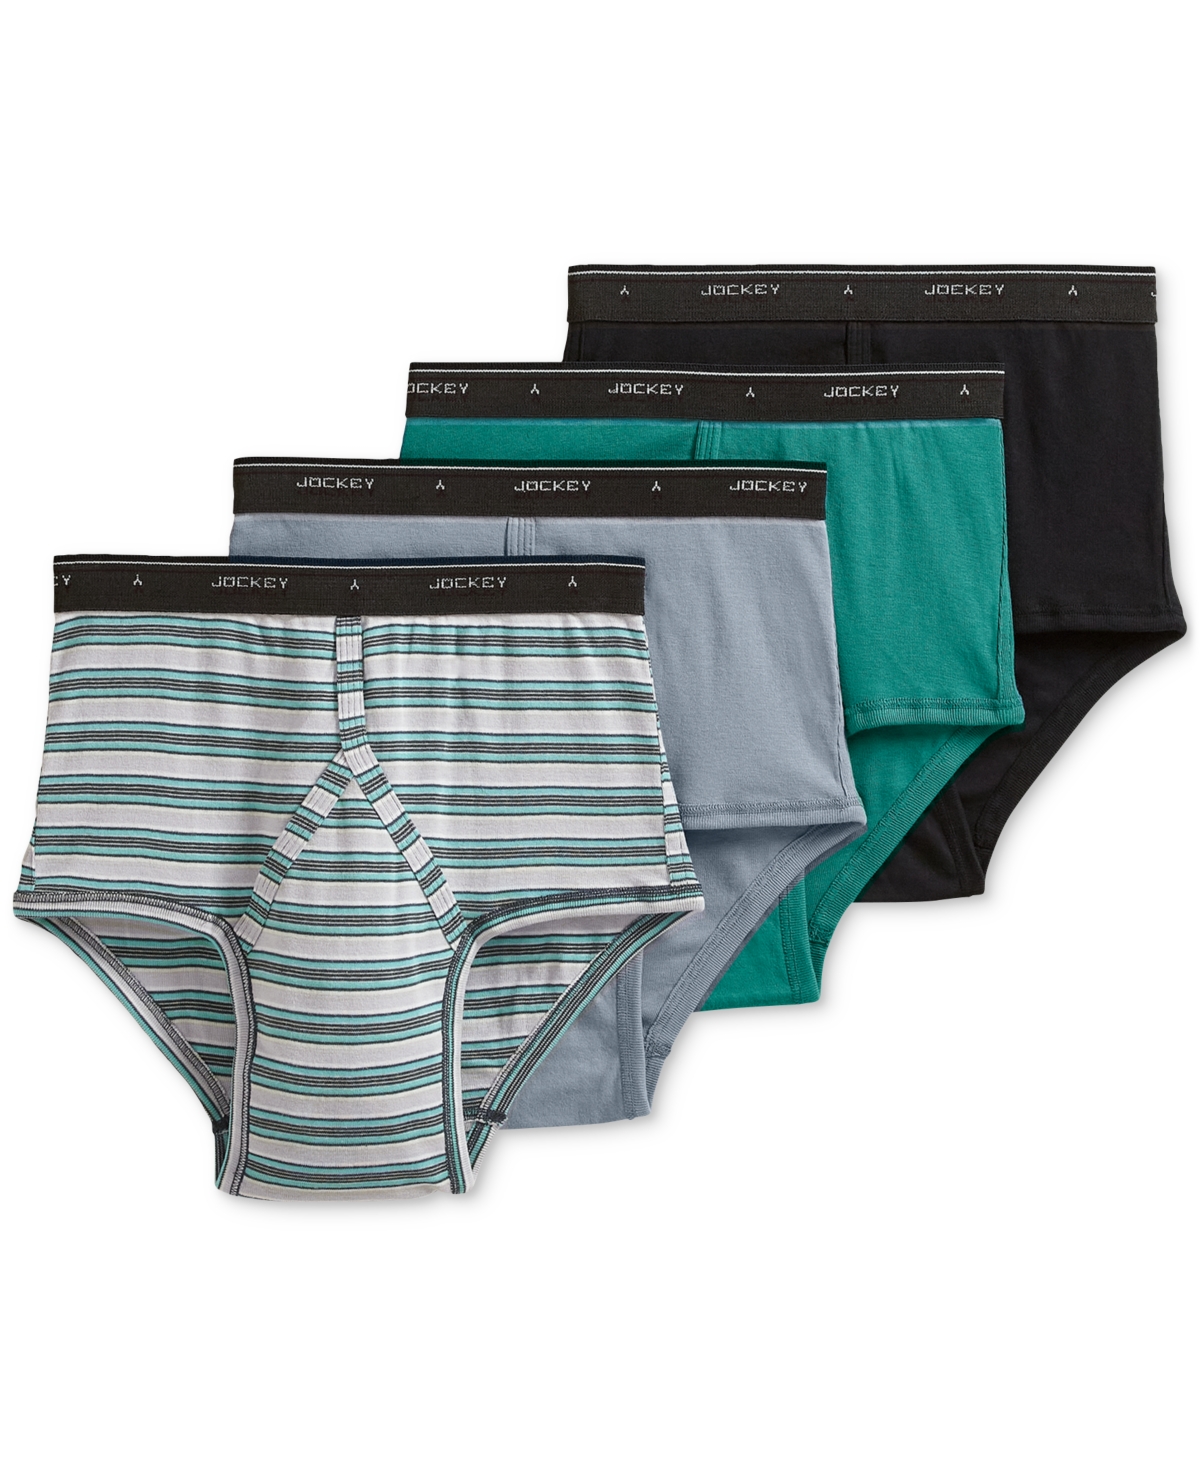 Jockey Men's Classic Collection Full-Rise Briefs 4-Pack